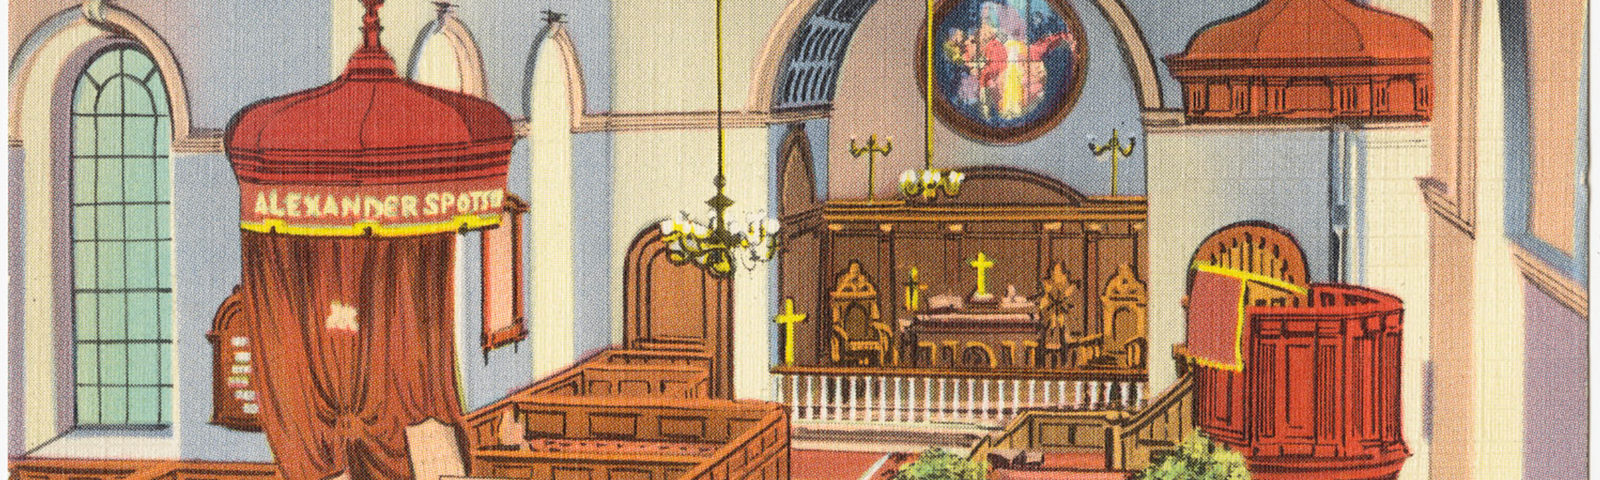 An original postcard shows the interior of an historic colonial church — with altar, stained-glass windows, preaching loft, and a large chair for the governor. There are wooden box pews for the parishioners.